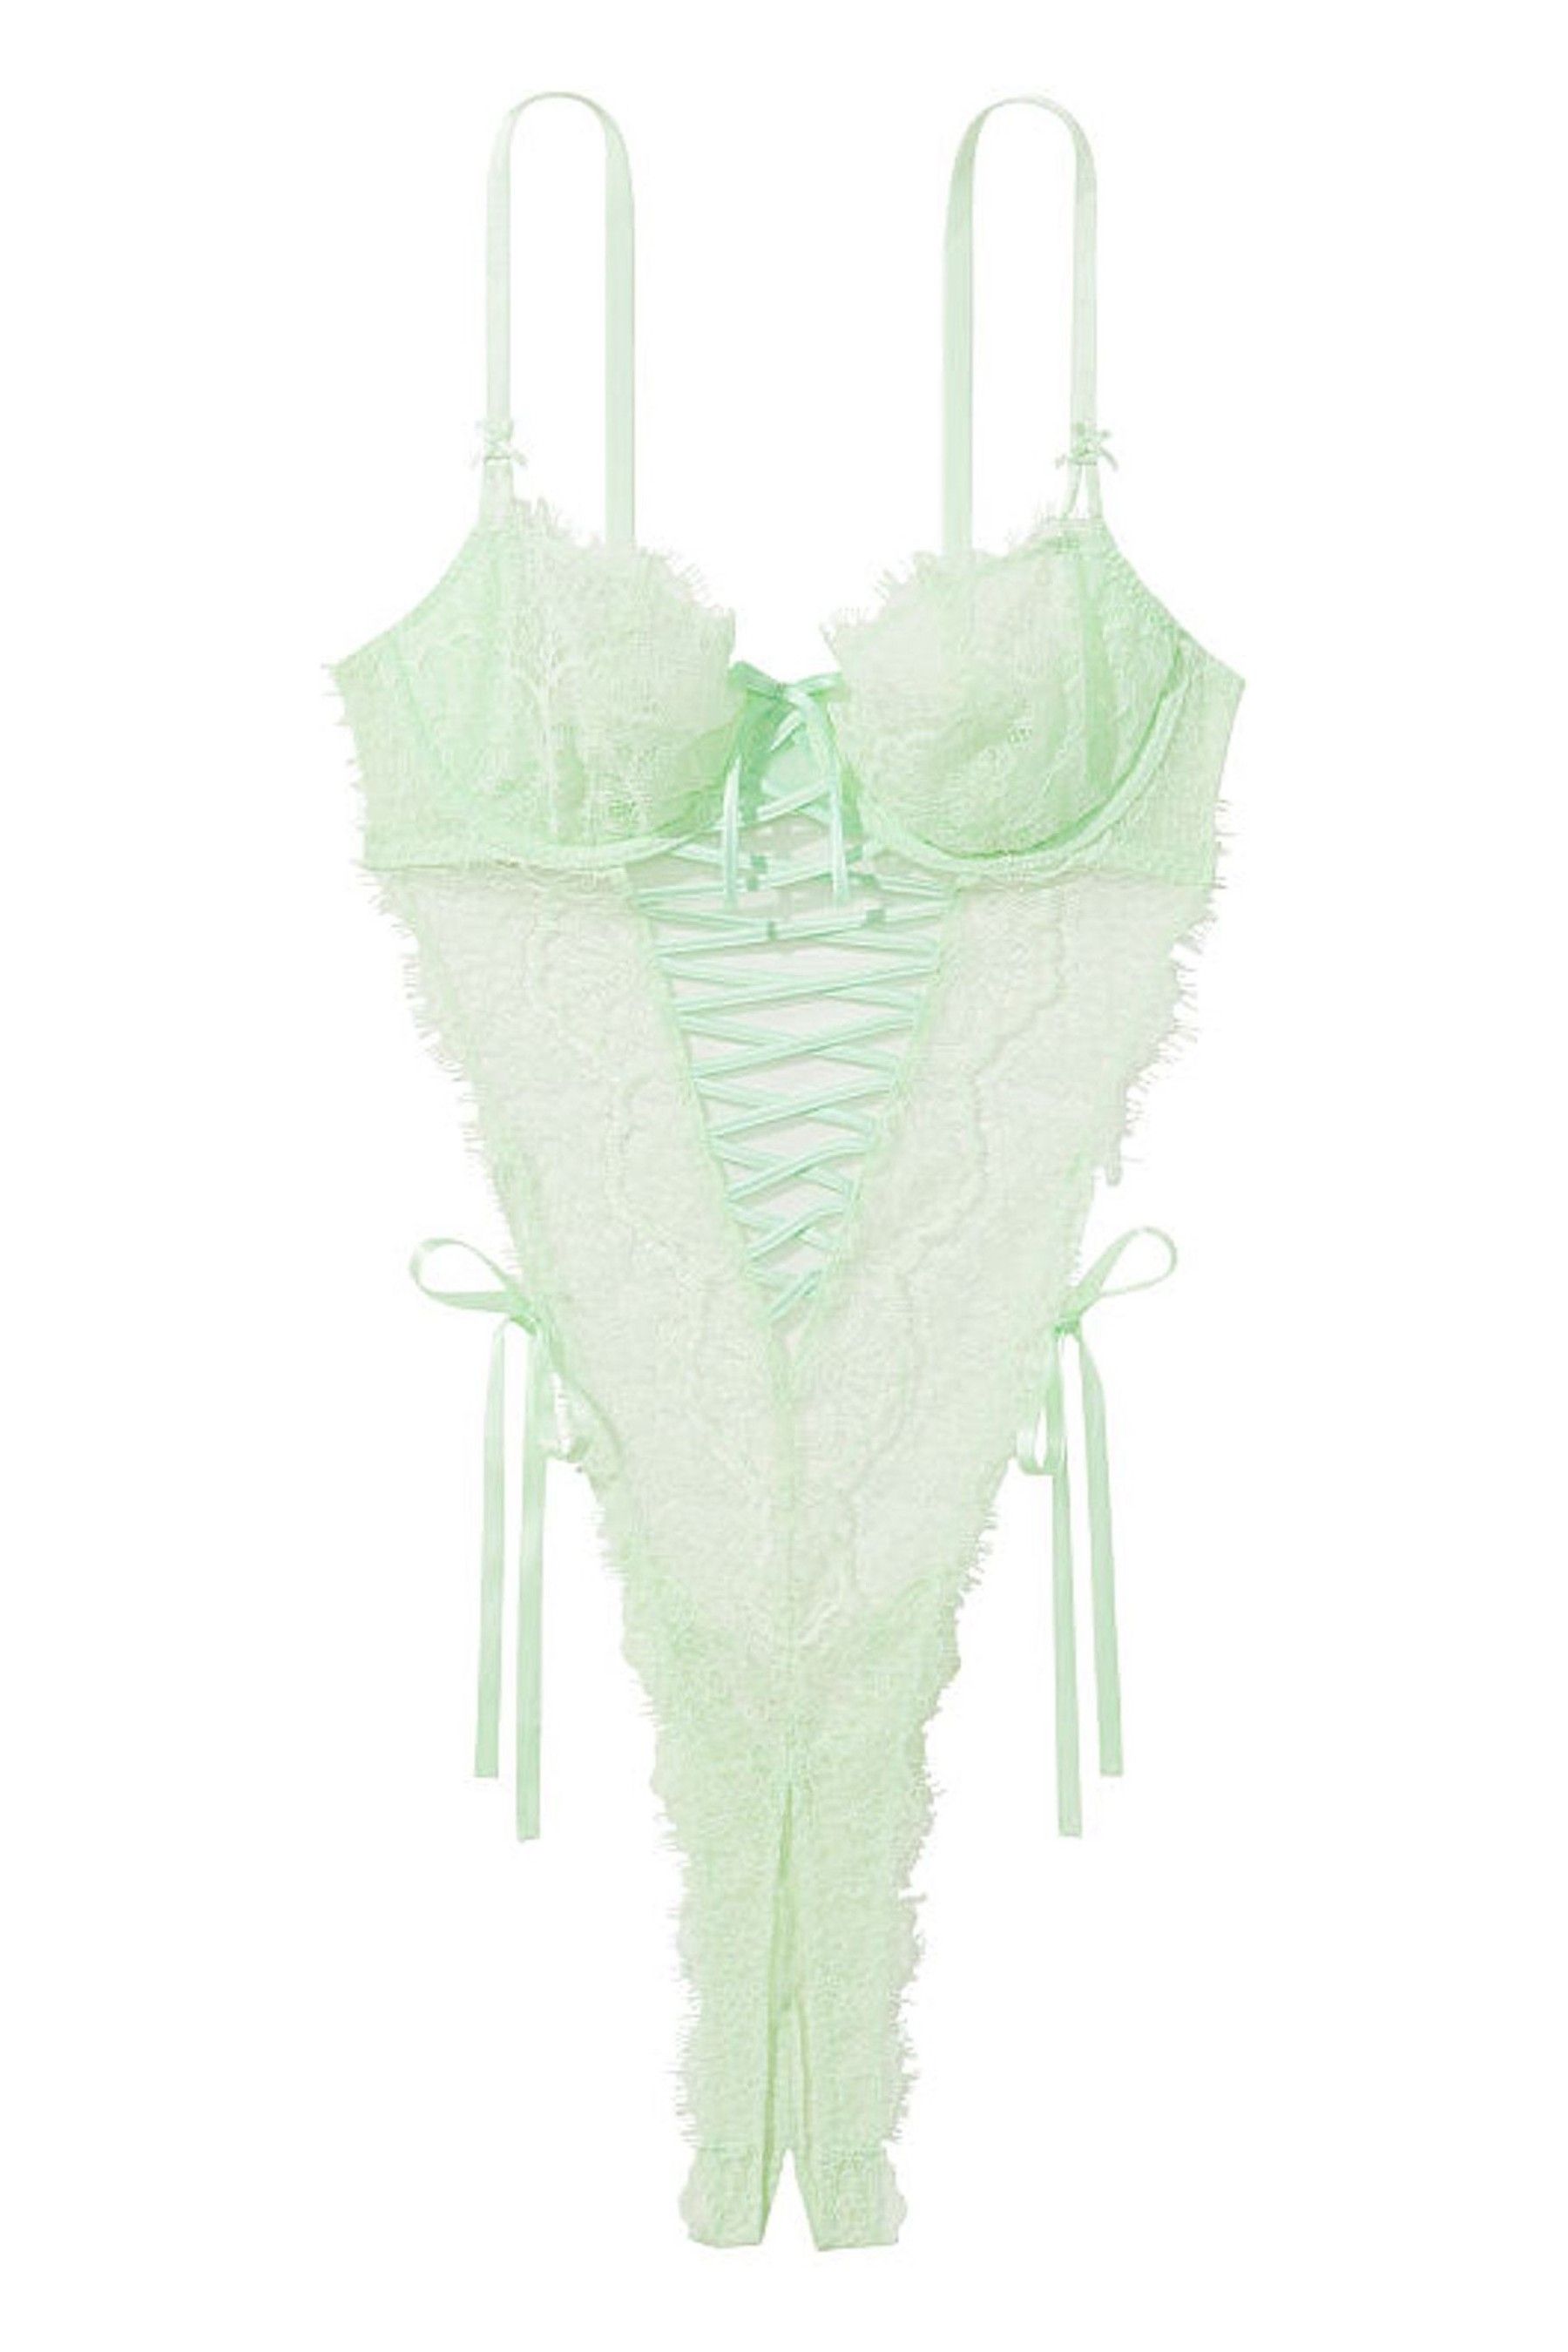 Buy Victoria S Secret Crotchless Wicked Teddy Bodysuit From The Victoria S Secret Uk Online Shop